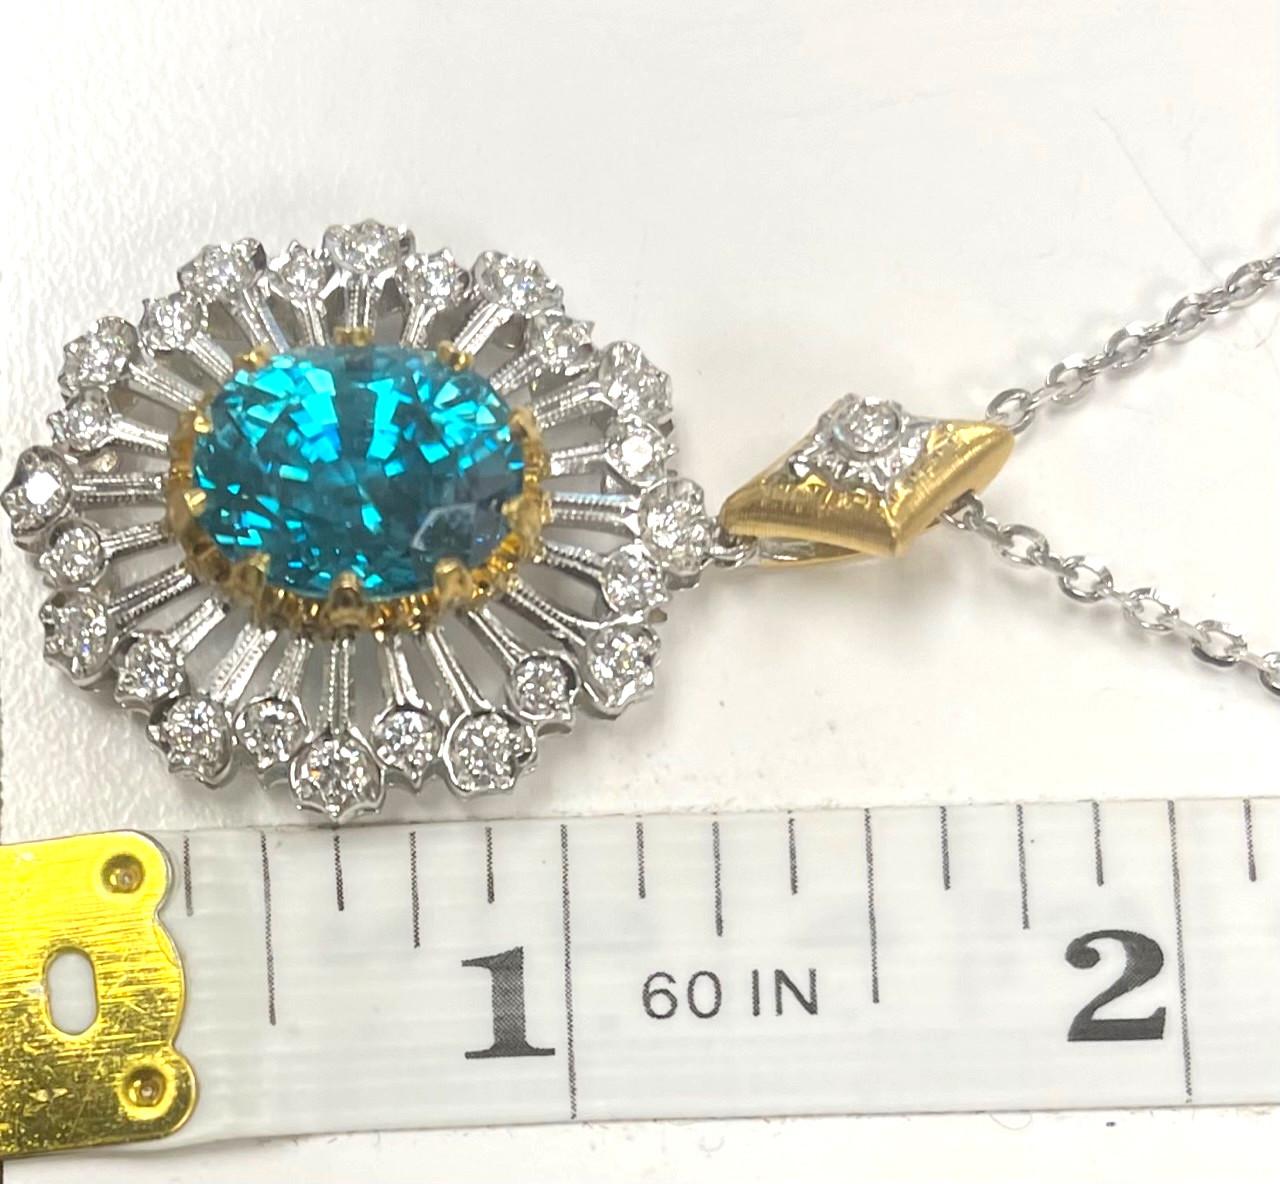 13.12 Carat Blue Zircon and Diamond Pendant Necklace in White and Yellow Gold  For Sale 2